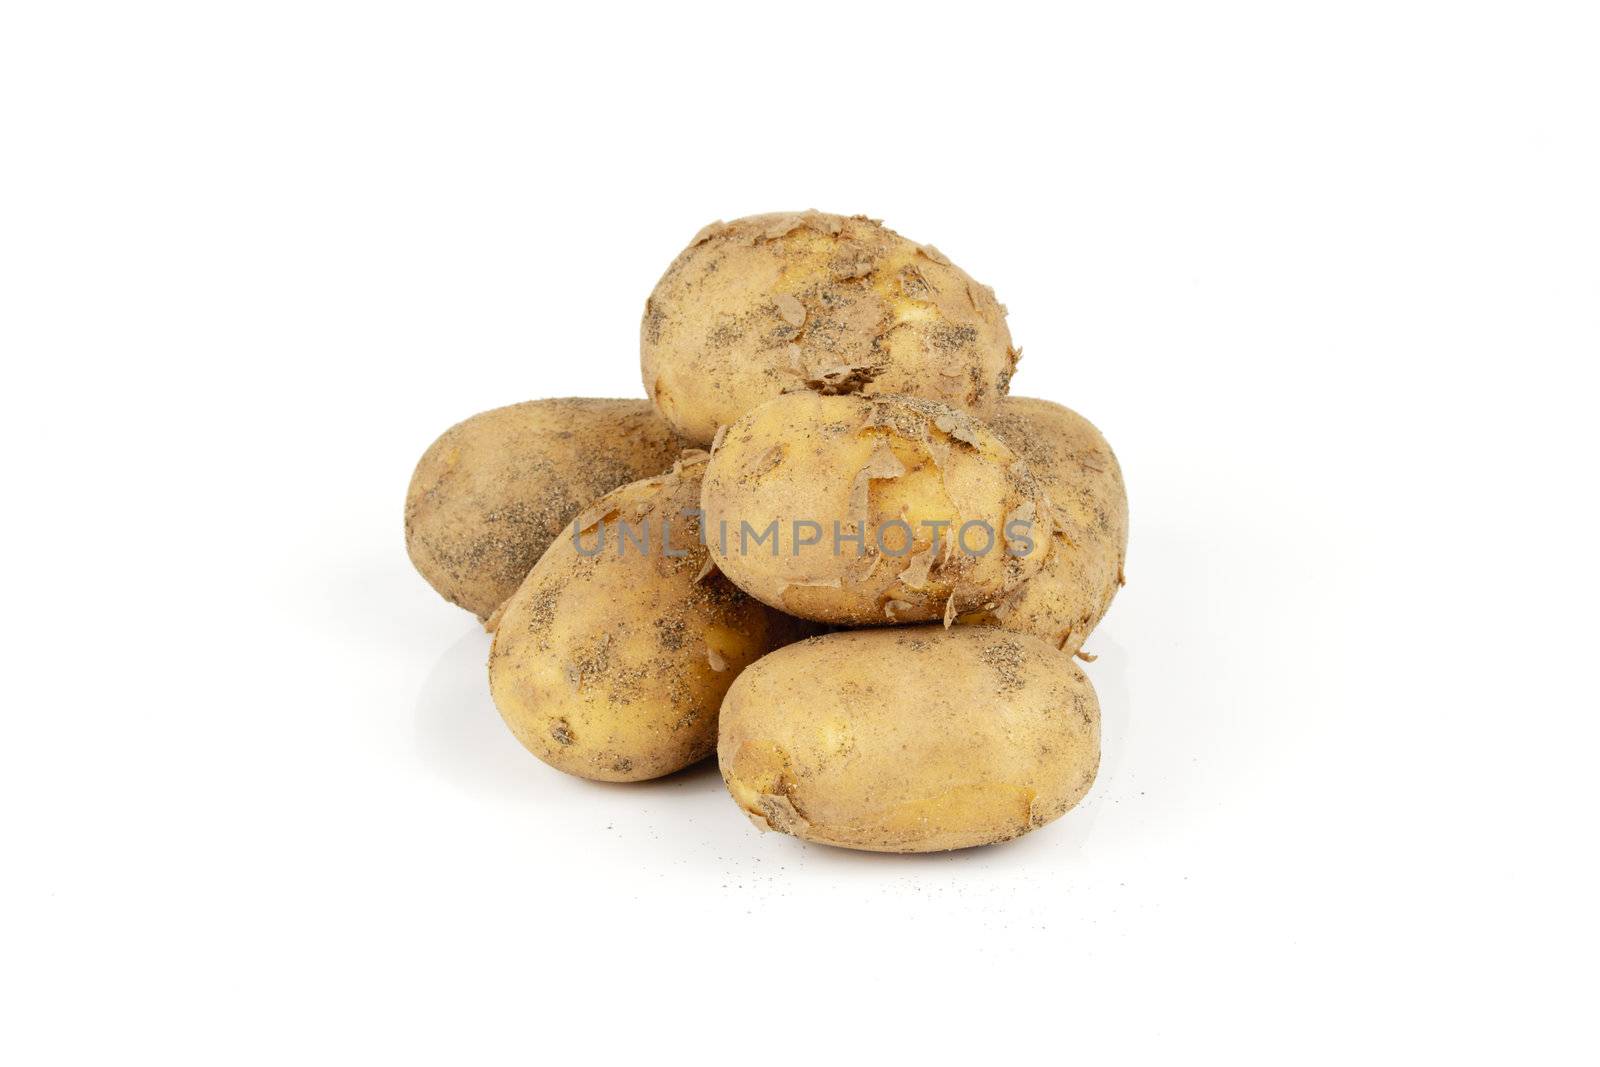 Small pile of brown unpeeled potatoes on a reflective white background